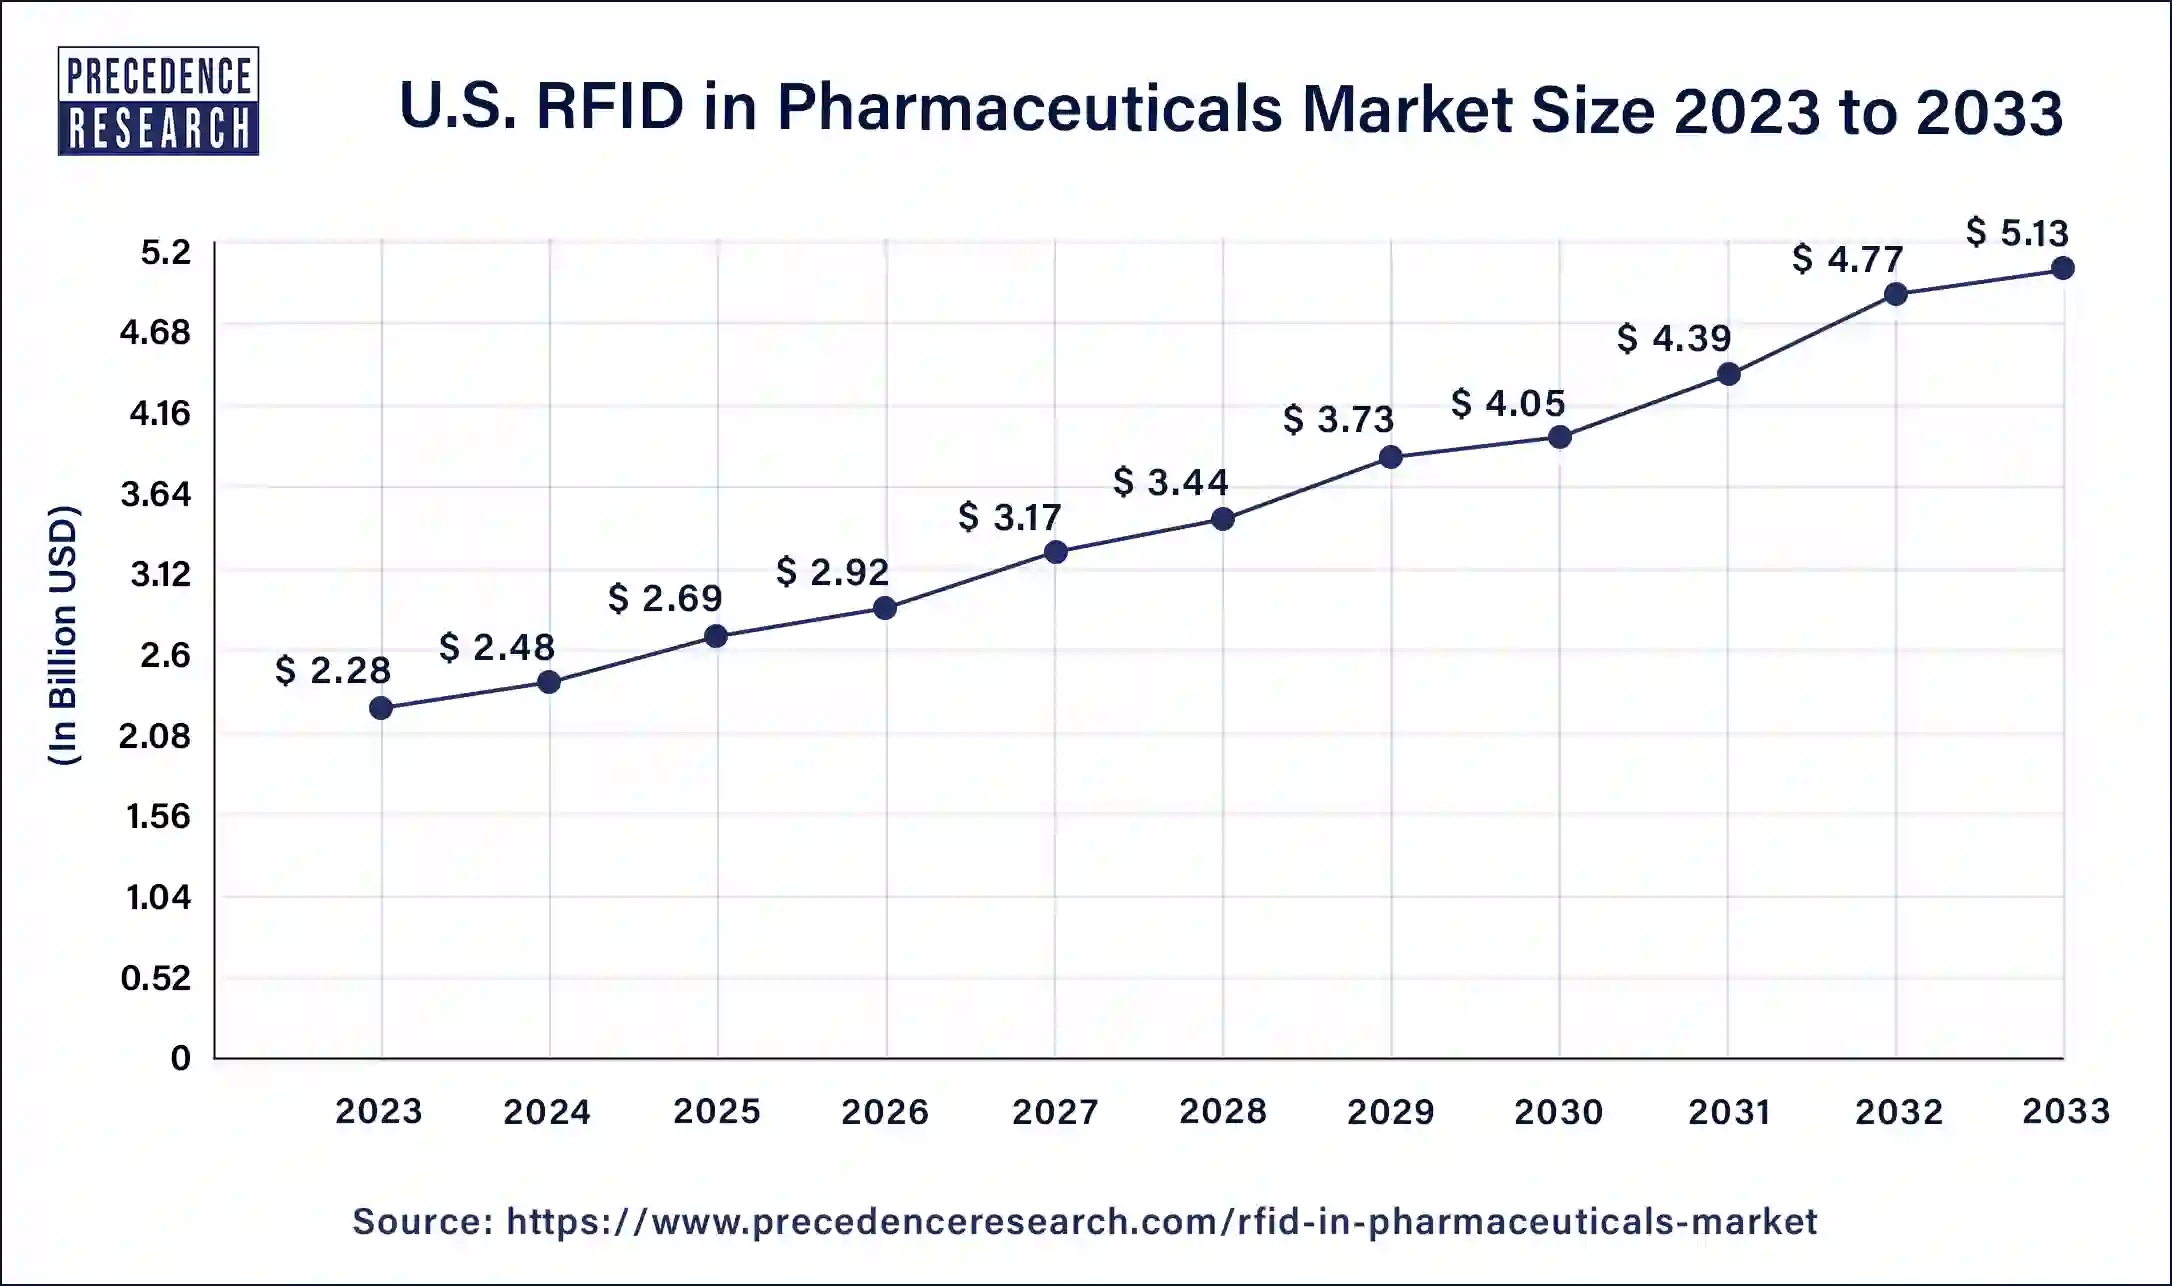 U.S. RFID in Pharmaceuticals Market Size 2024 to 2033